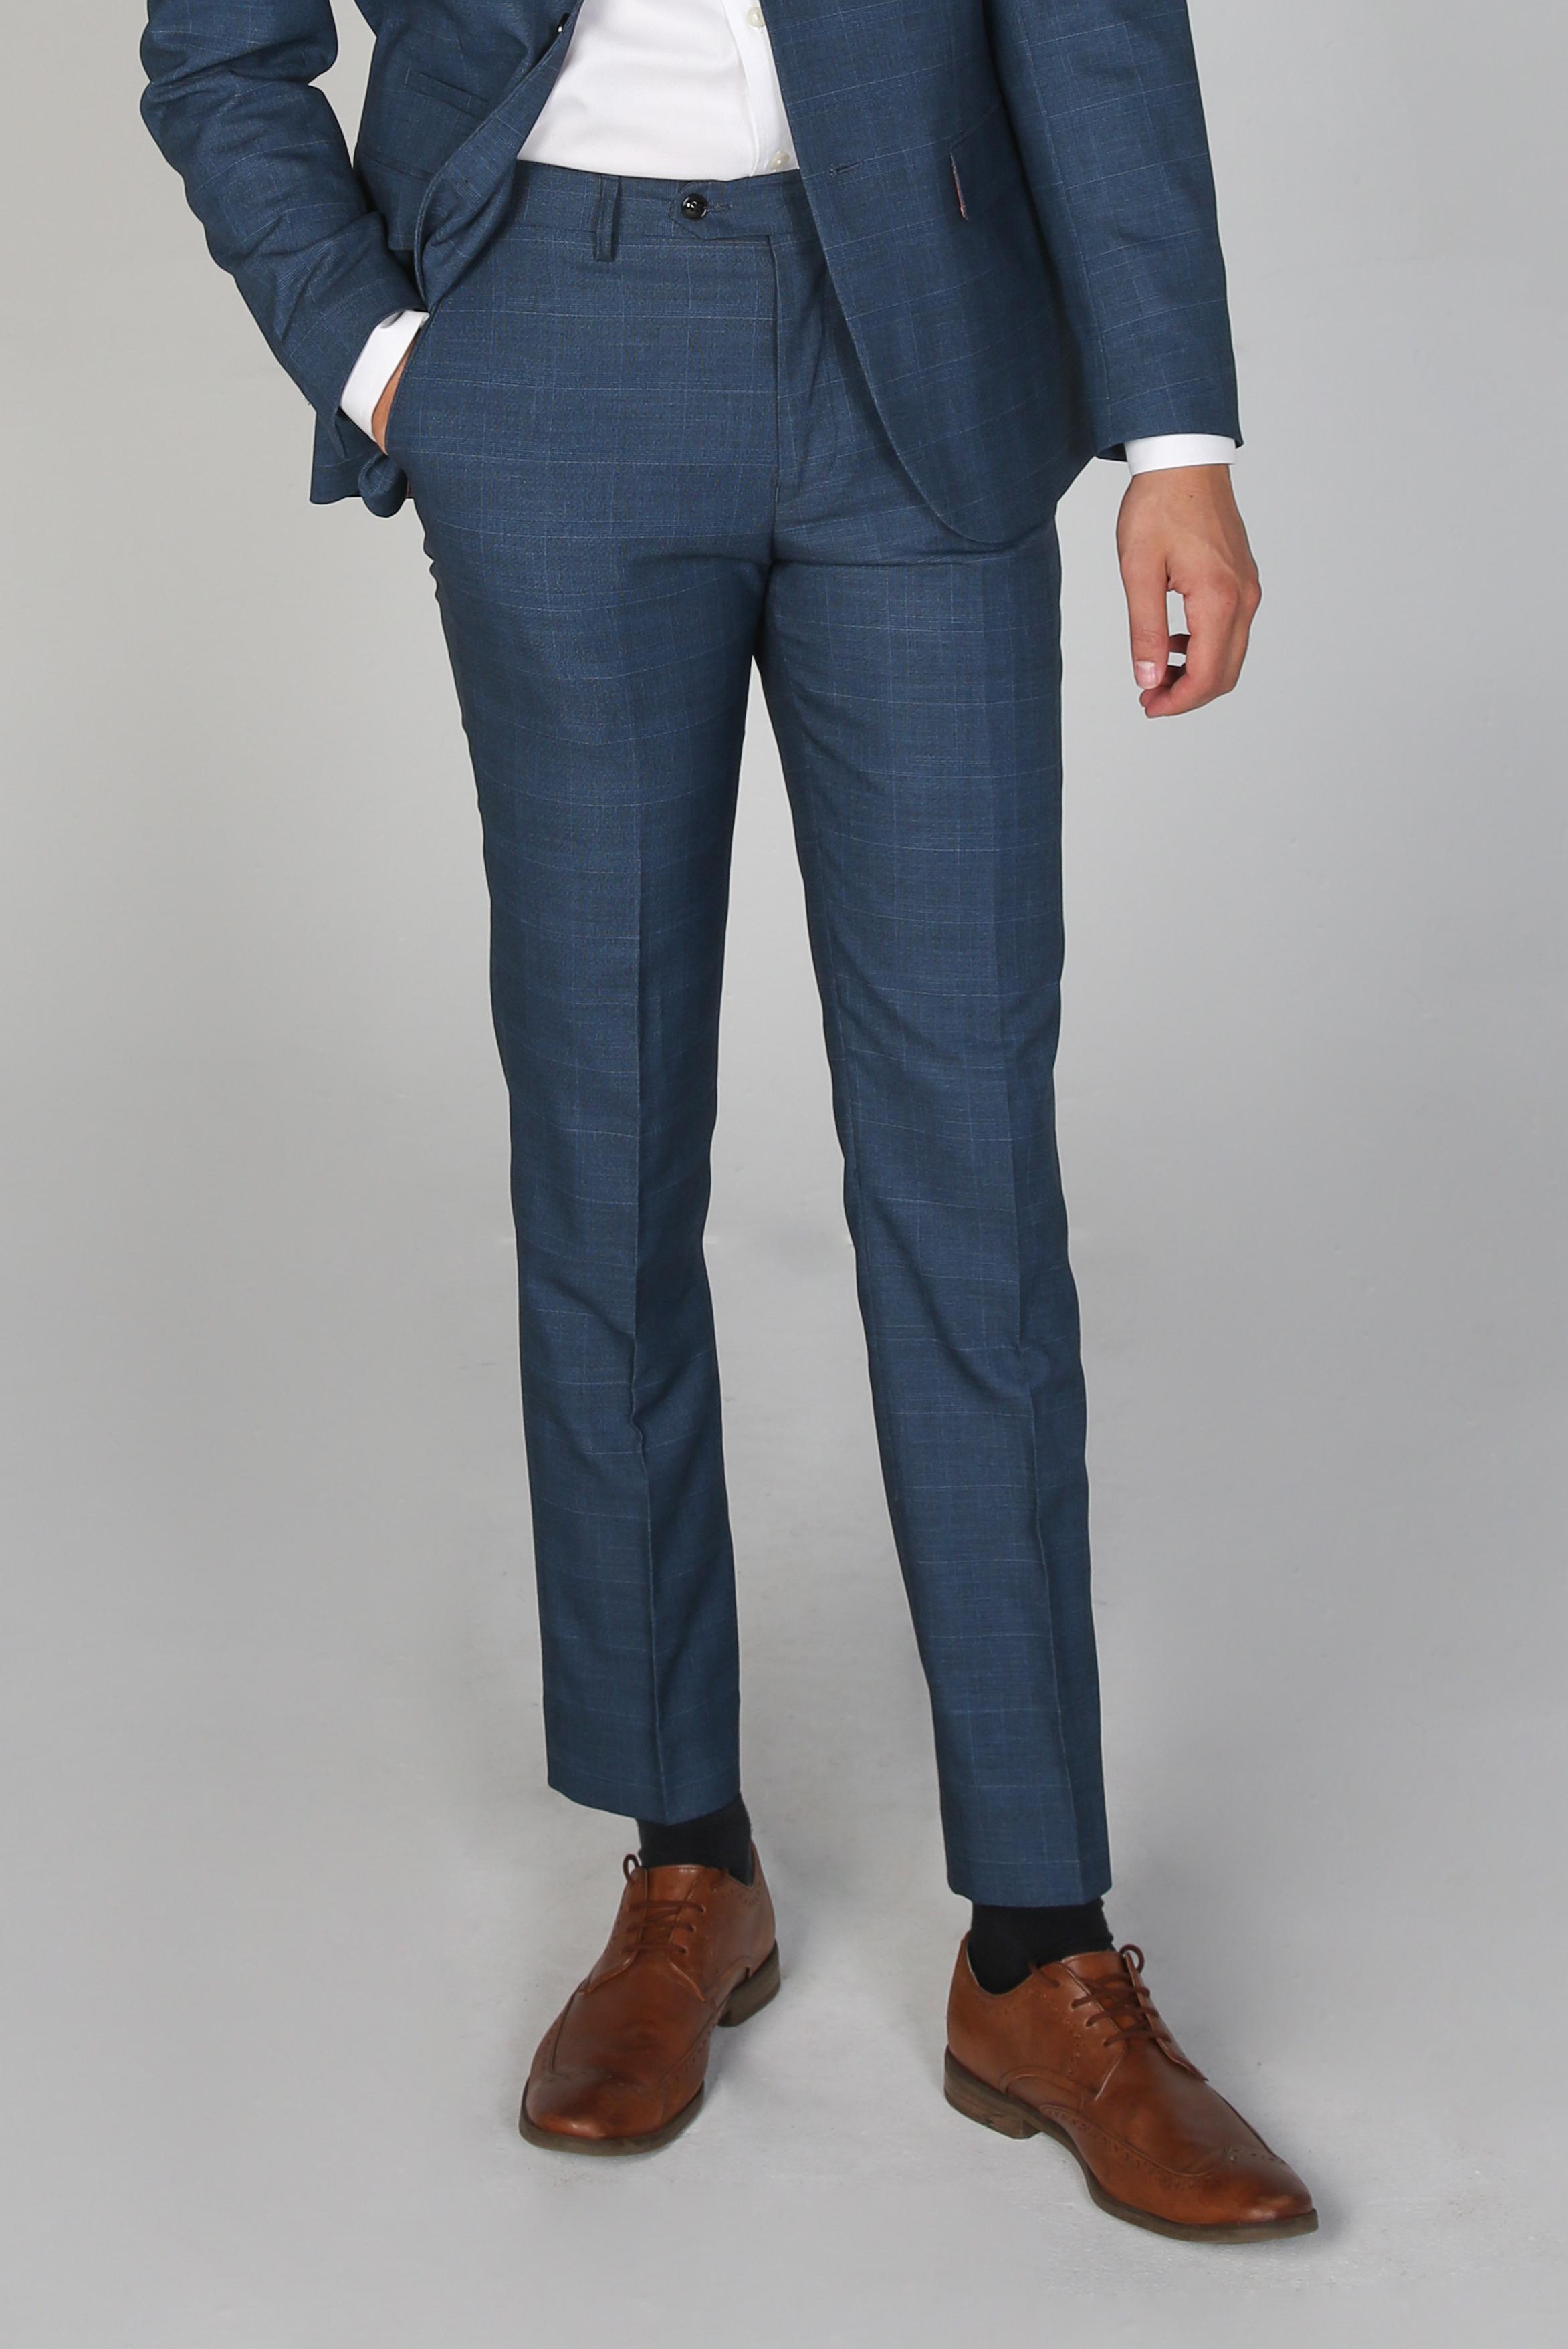 Men’s Check Tailored Fit Navy Trousers - VICEROY